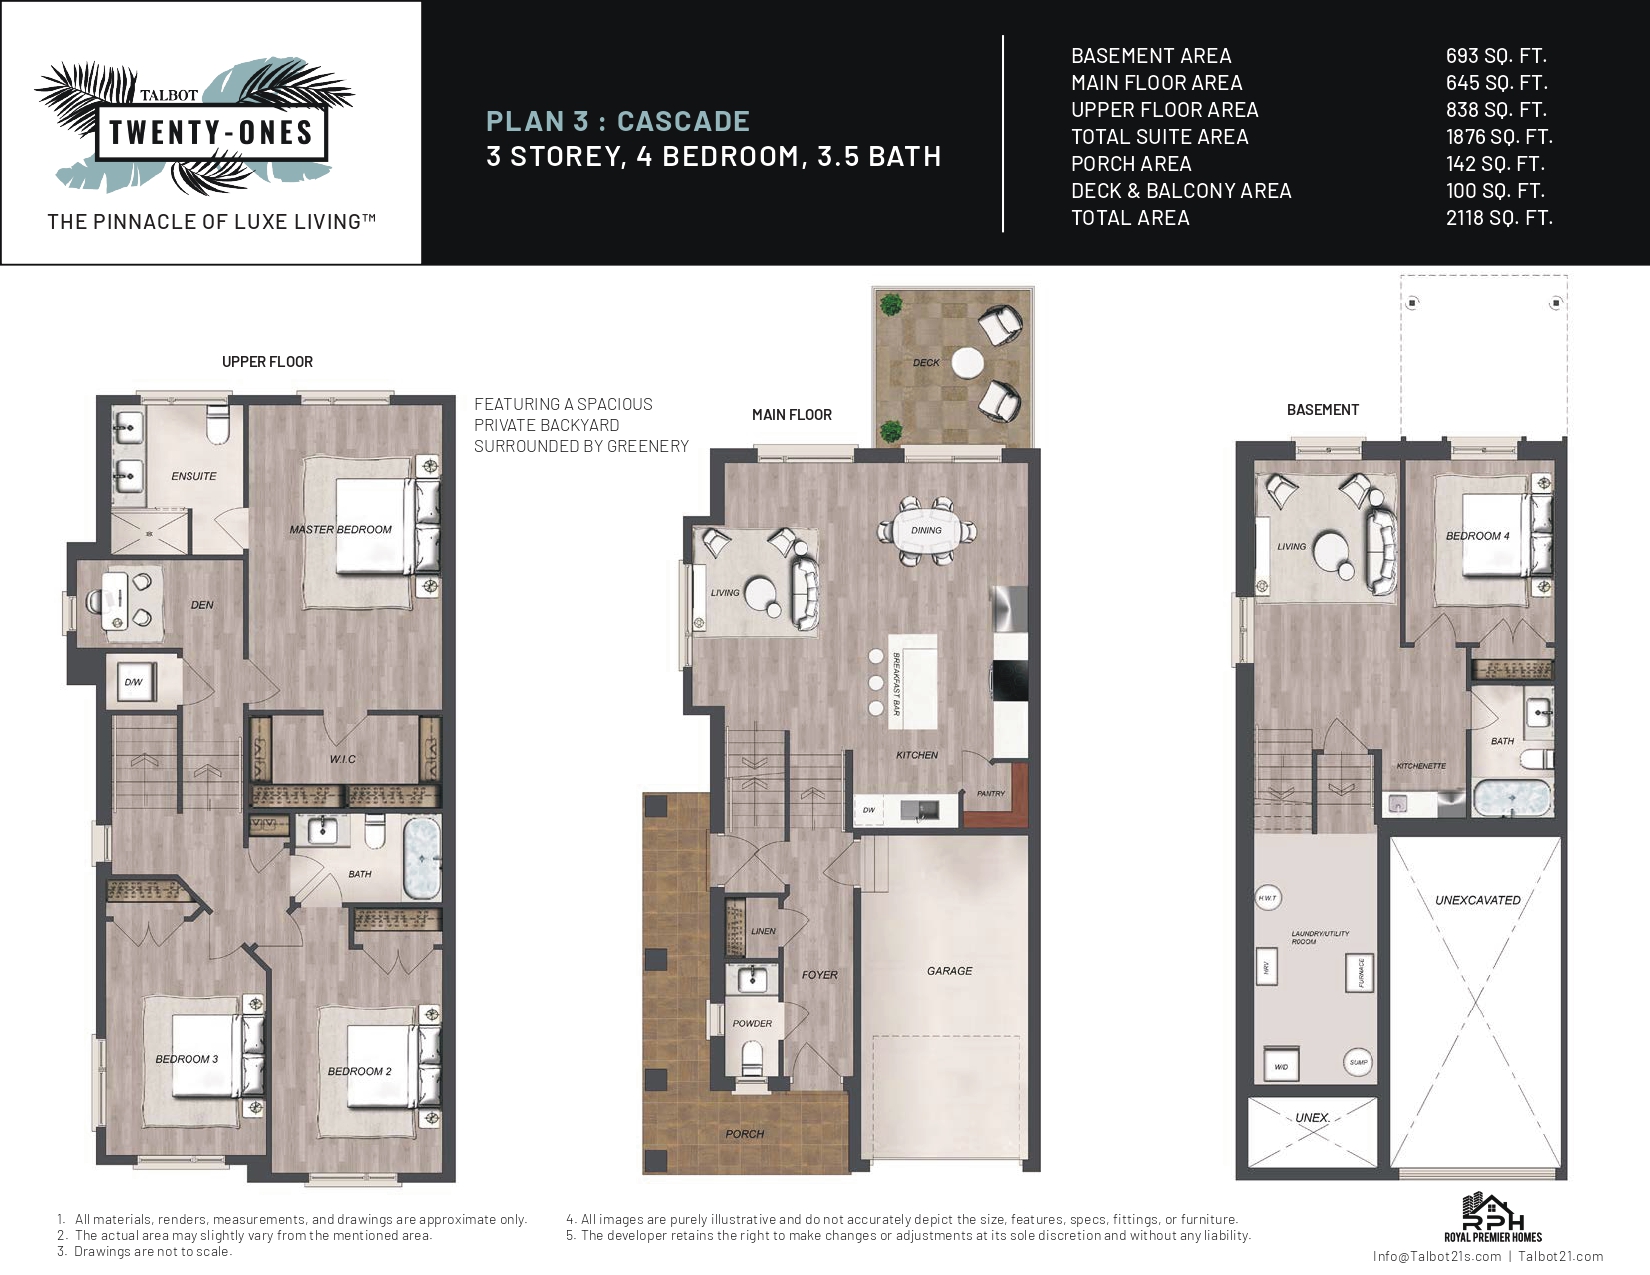 PLAN 3 : CACADE Floor Plan of Talbot Twenty-Ones Towns with undefined beds